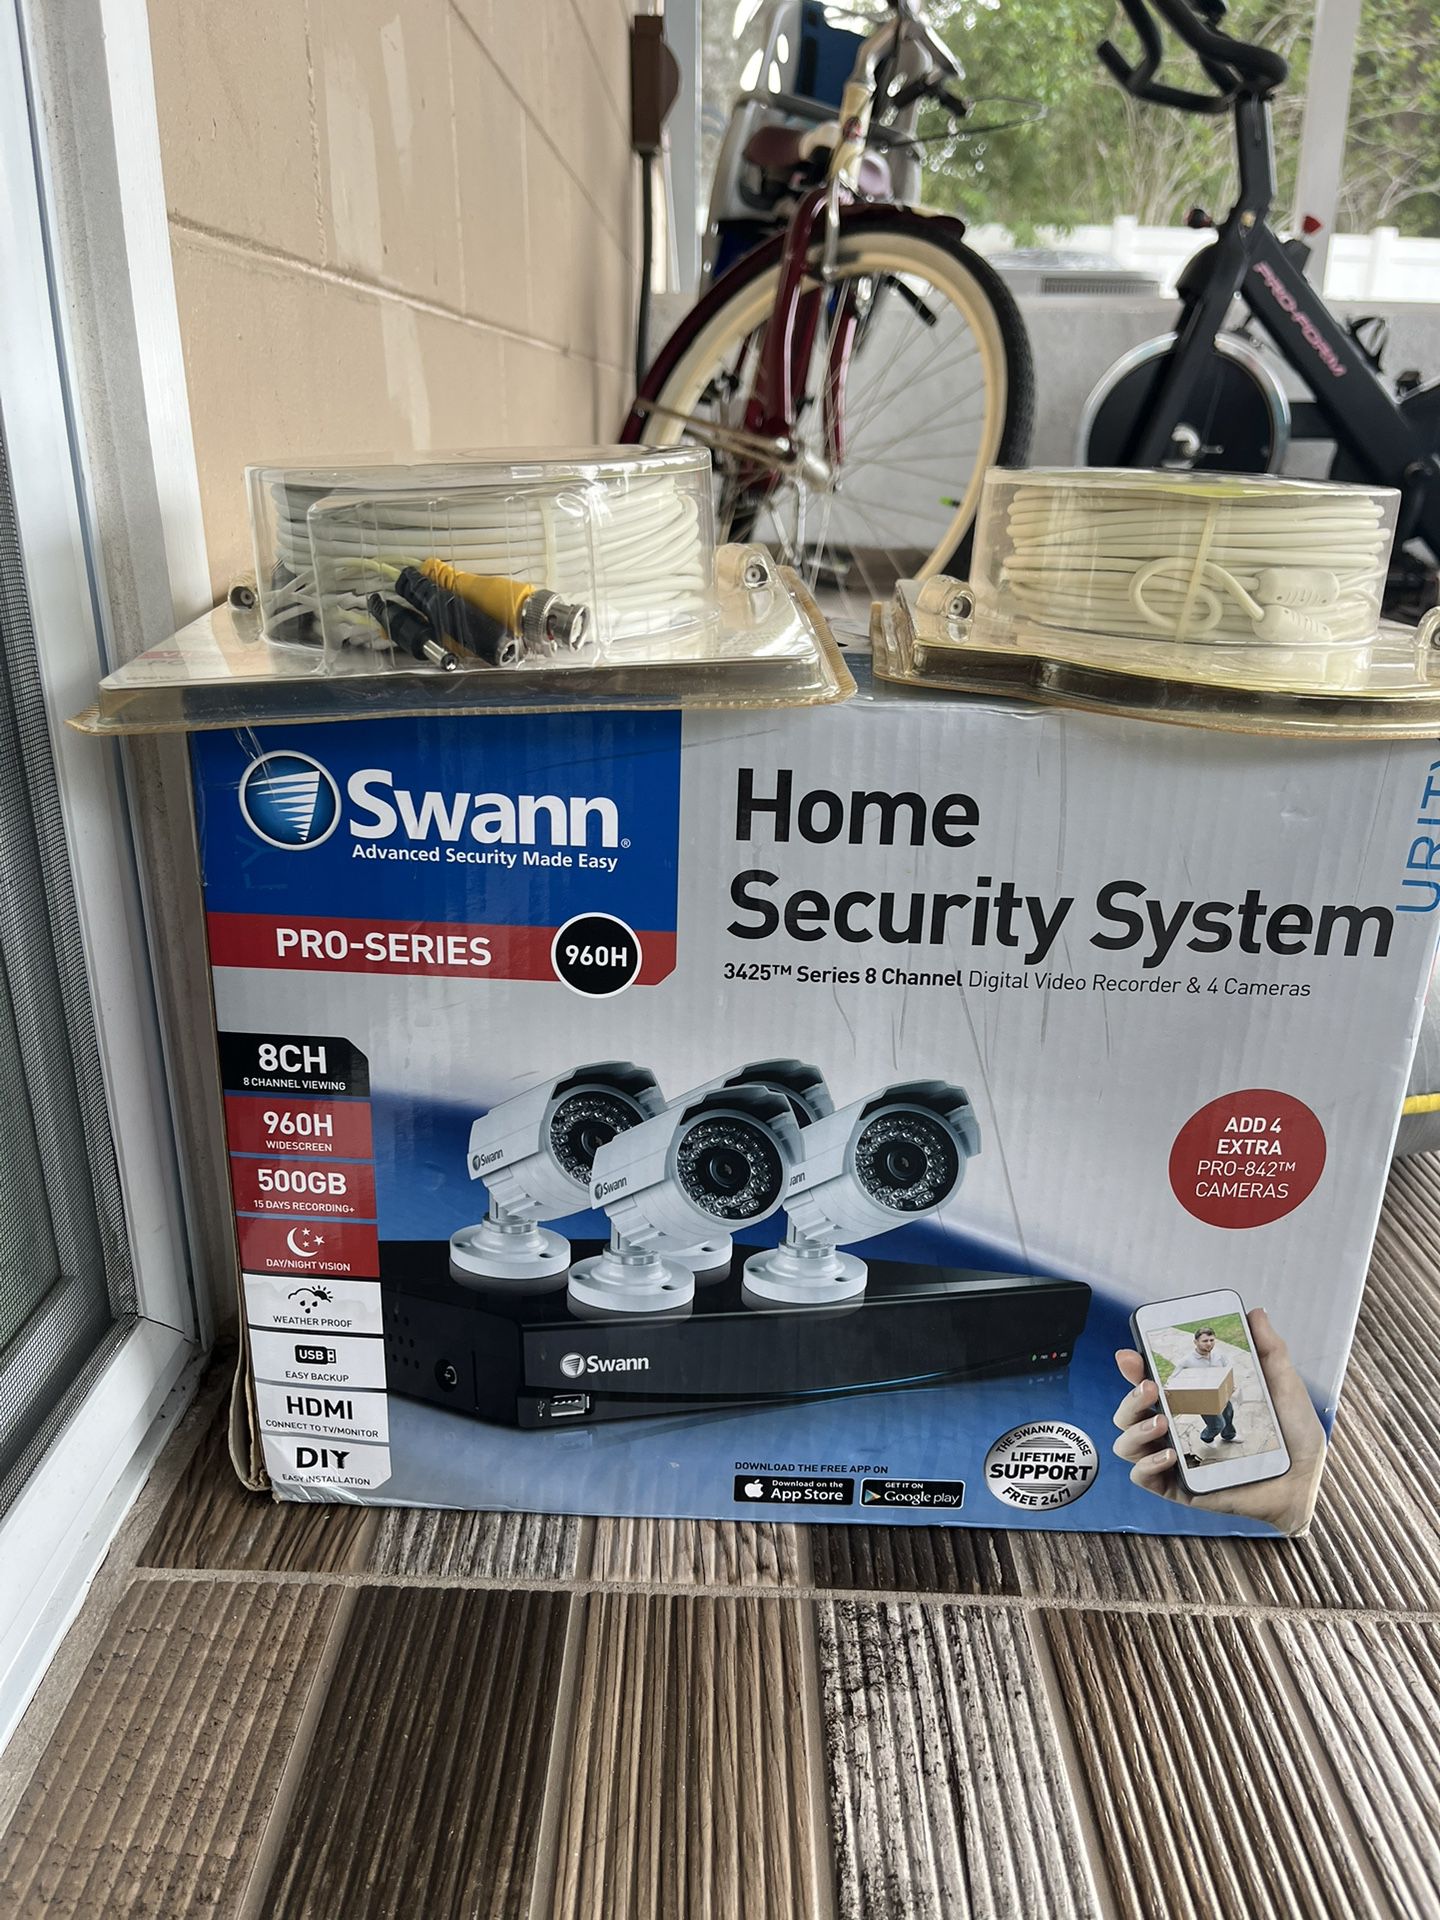 Home Security System And 2 BNC Extension Cables